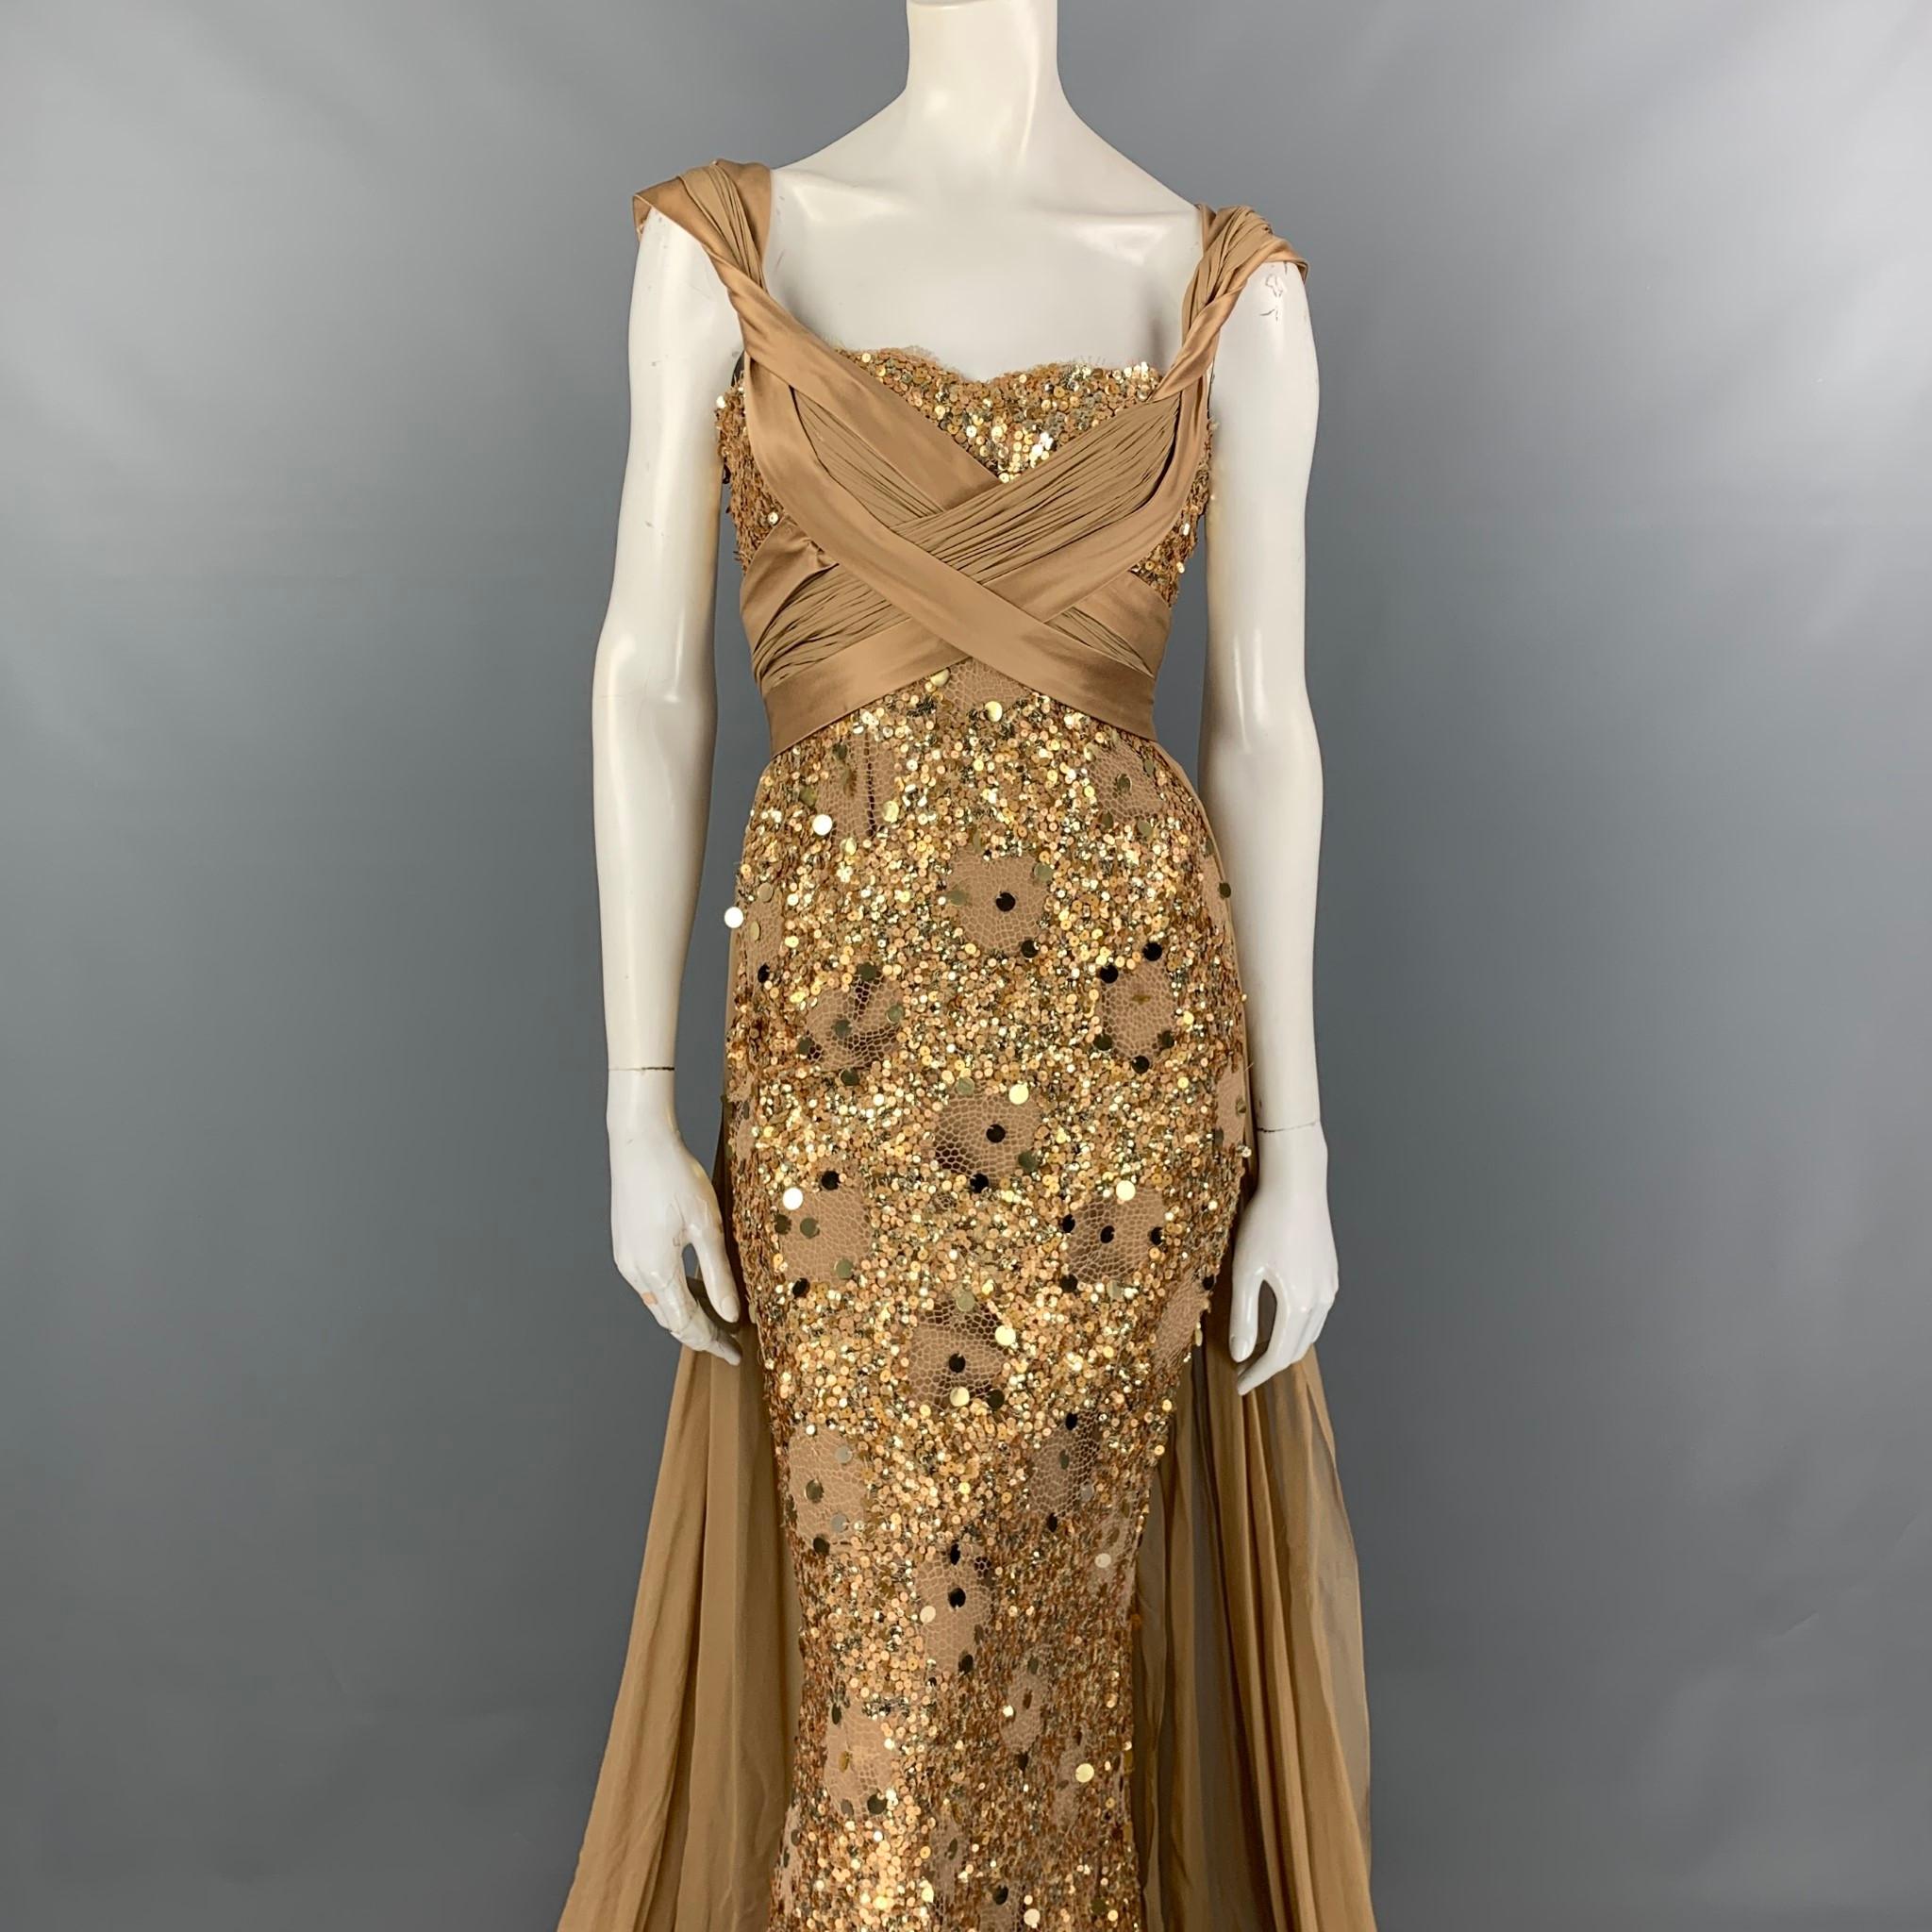 ZUHAIR MURAD gown comes in a beige & gold silk blend with a slip liner featuring a ruched bodice, sequined details, crossover straps, and a back zip up closure. 

Very Good Pre-Owned Condition.
Marked: 40

Measurements:

Bust: 30 in.
Waist: 24